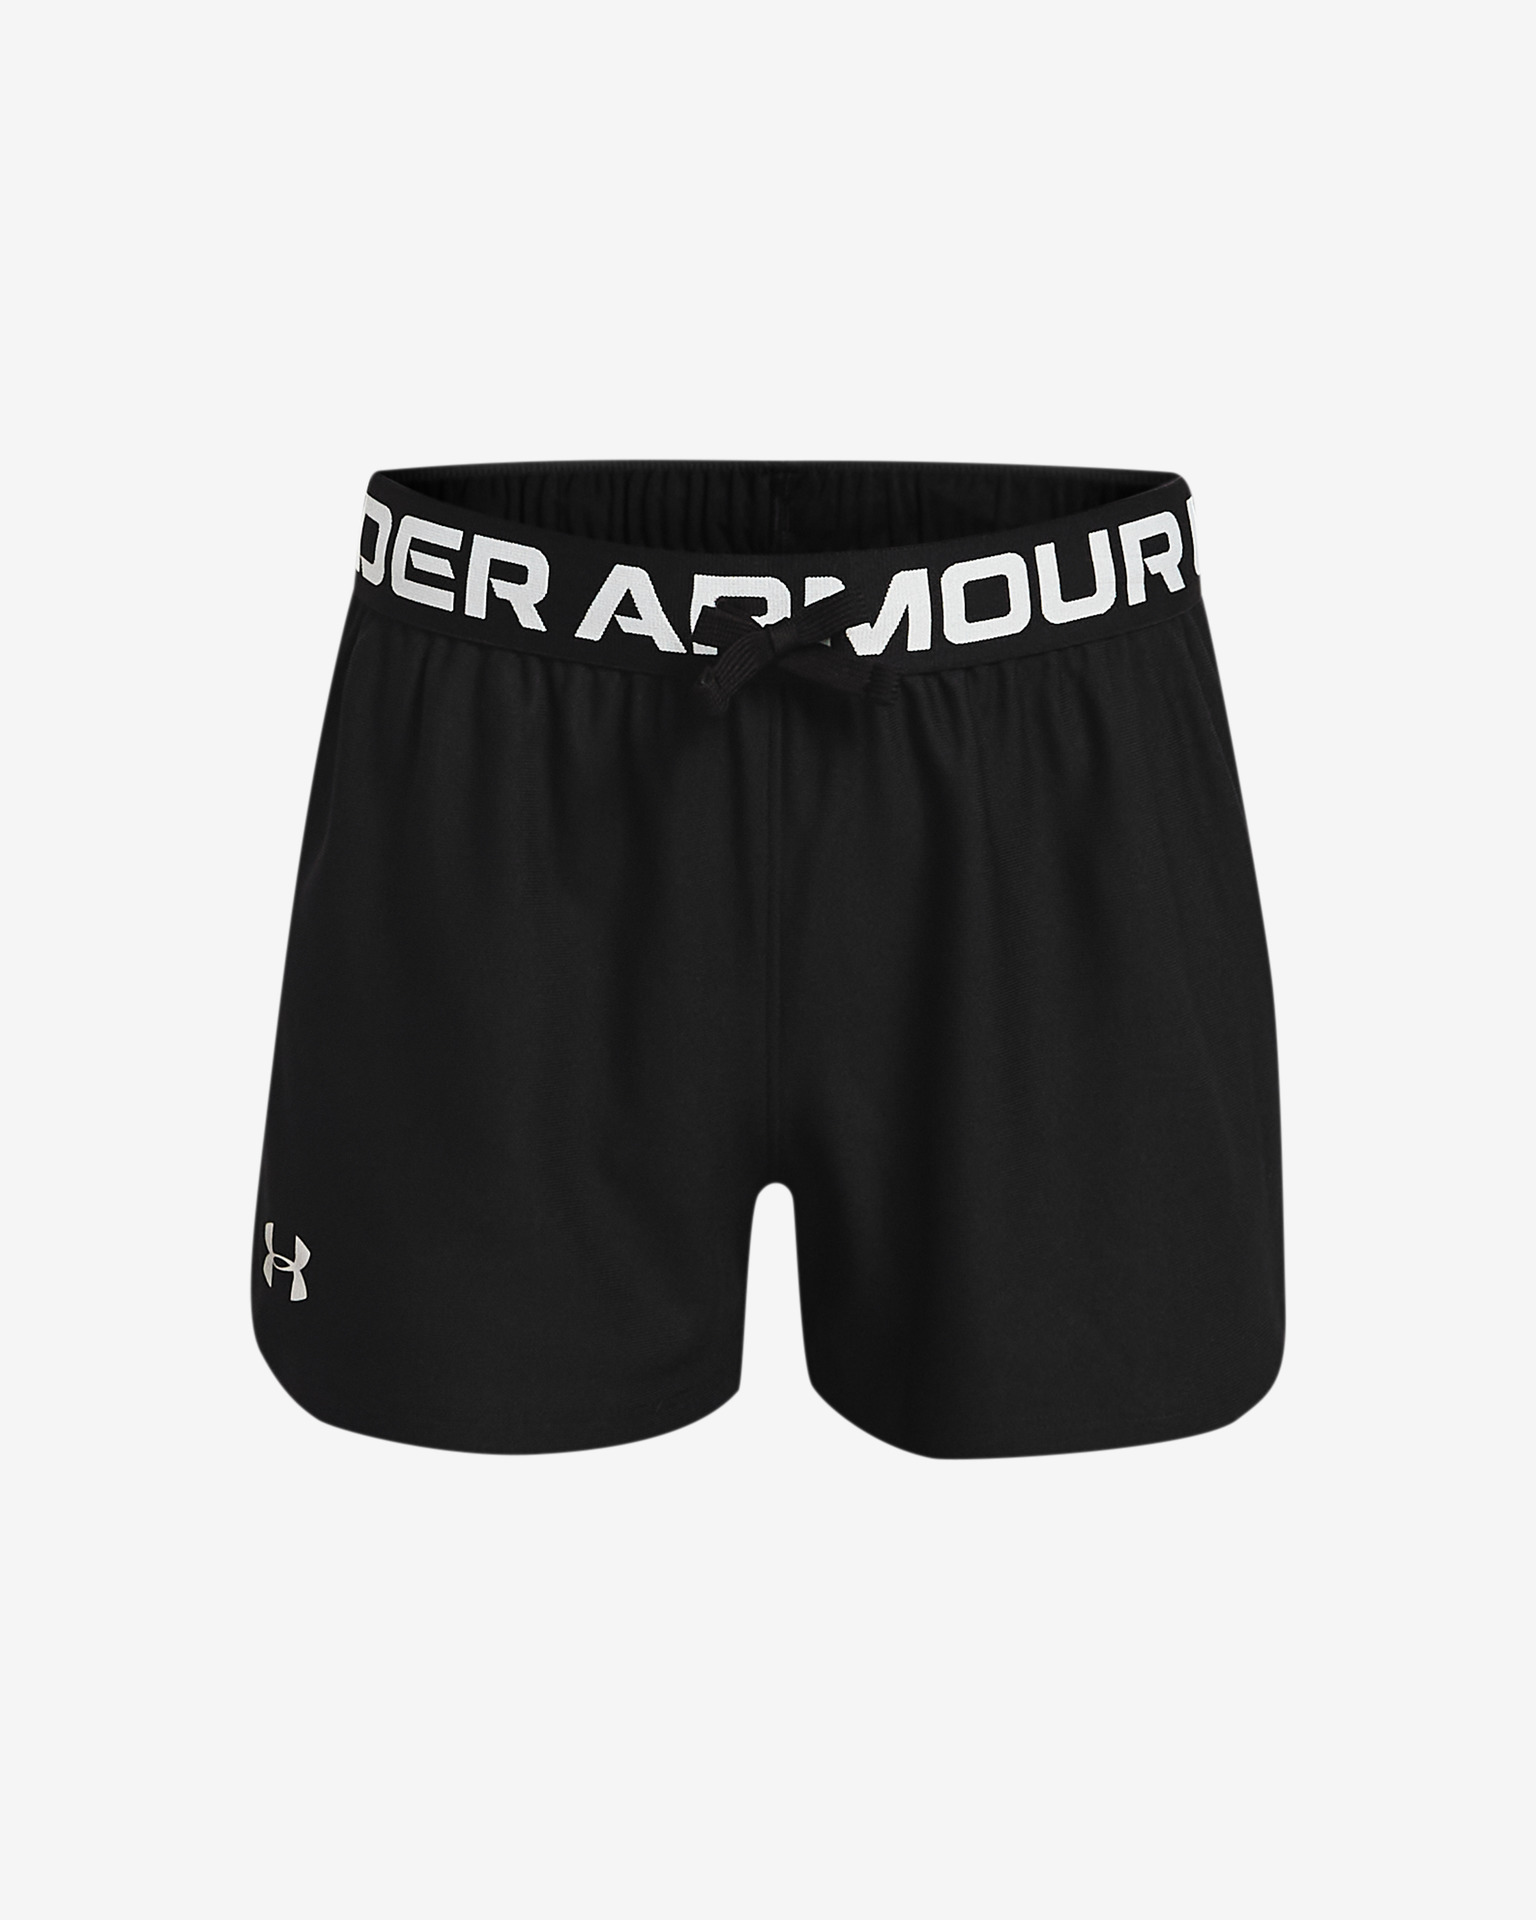 Under Armour Boys' Match Play Shorts - Black, Youth X-Large